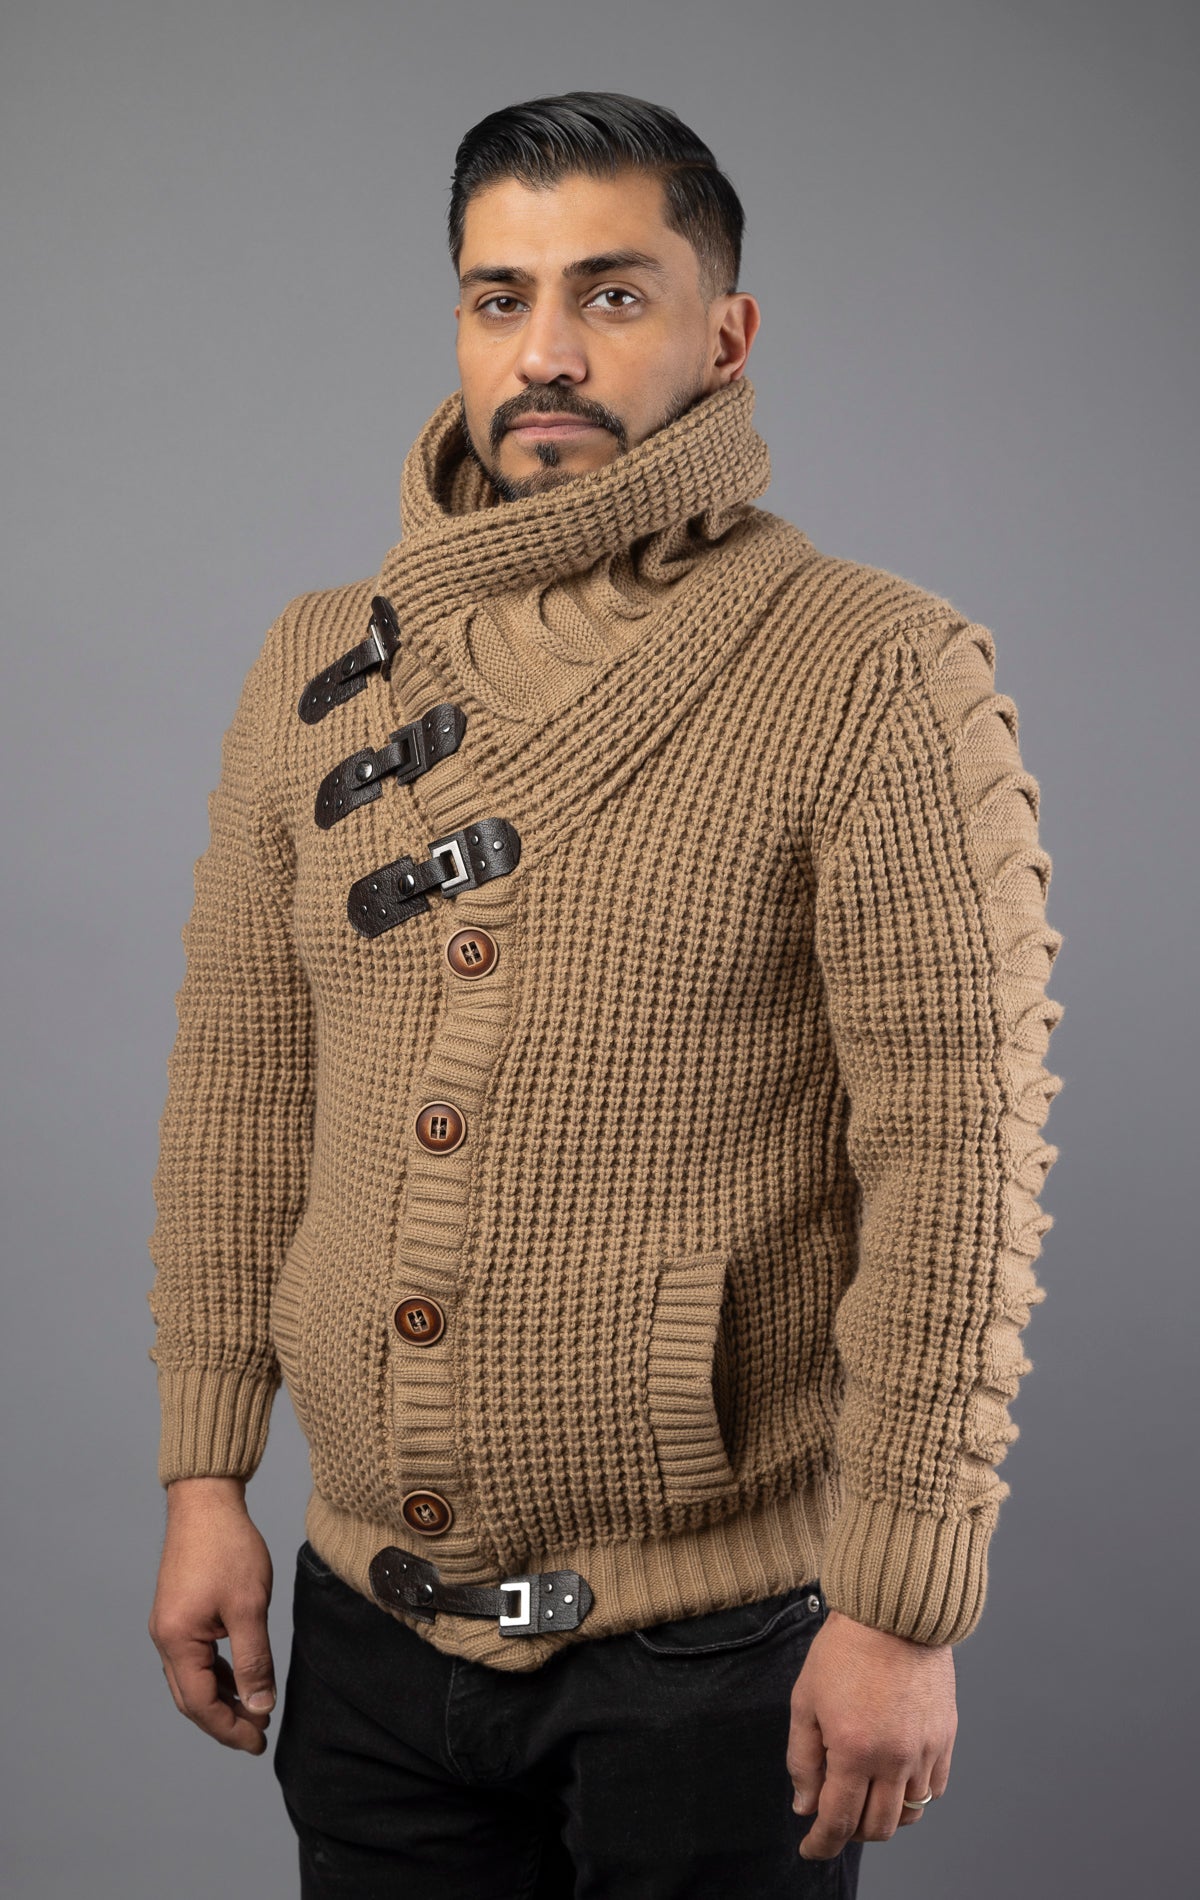 Model wearing brown versatile, high-quality sweater designed with heavy weight material to be worn in multiple ways